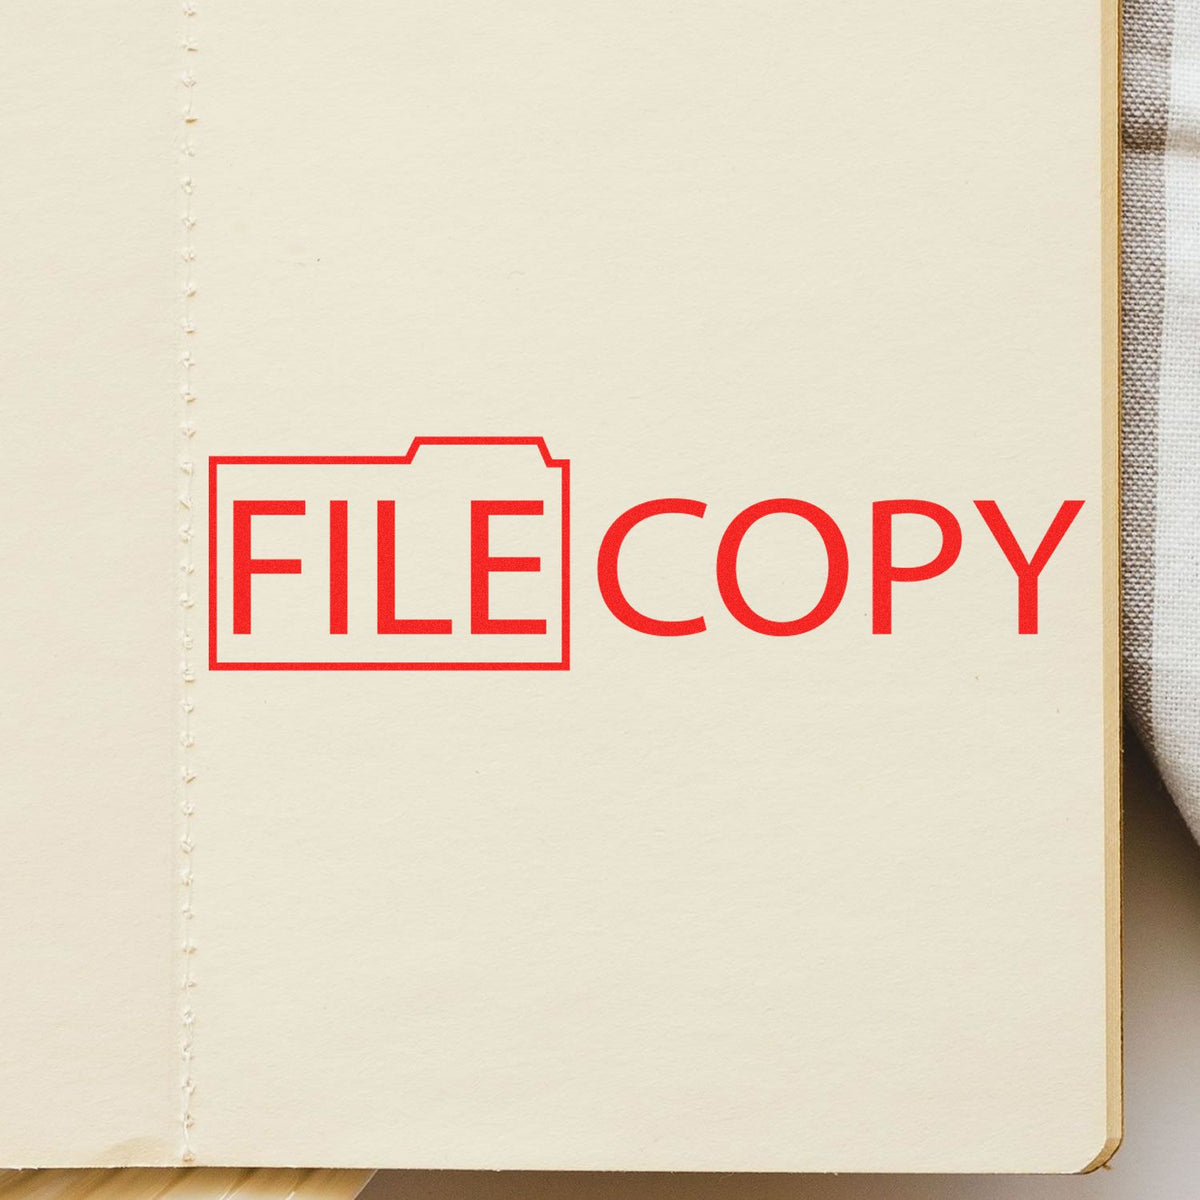 File Copy with Folder Rubber Stamp In Use Photo